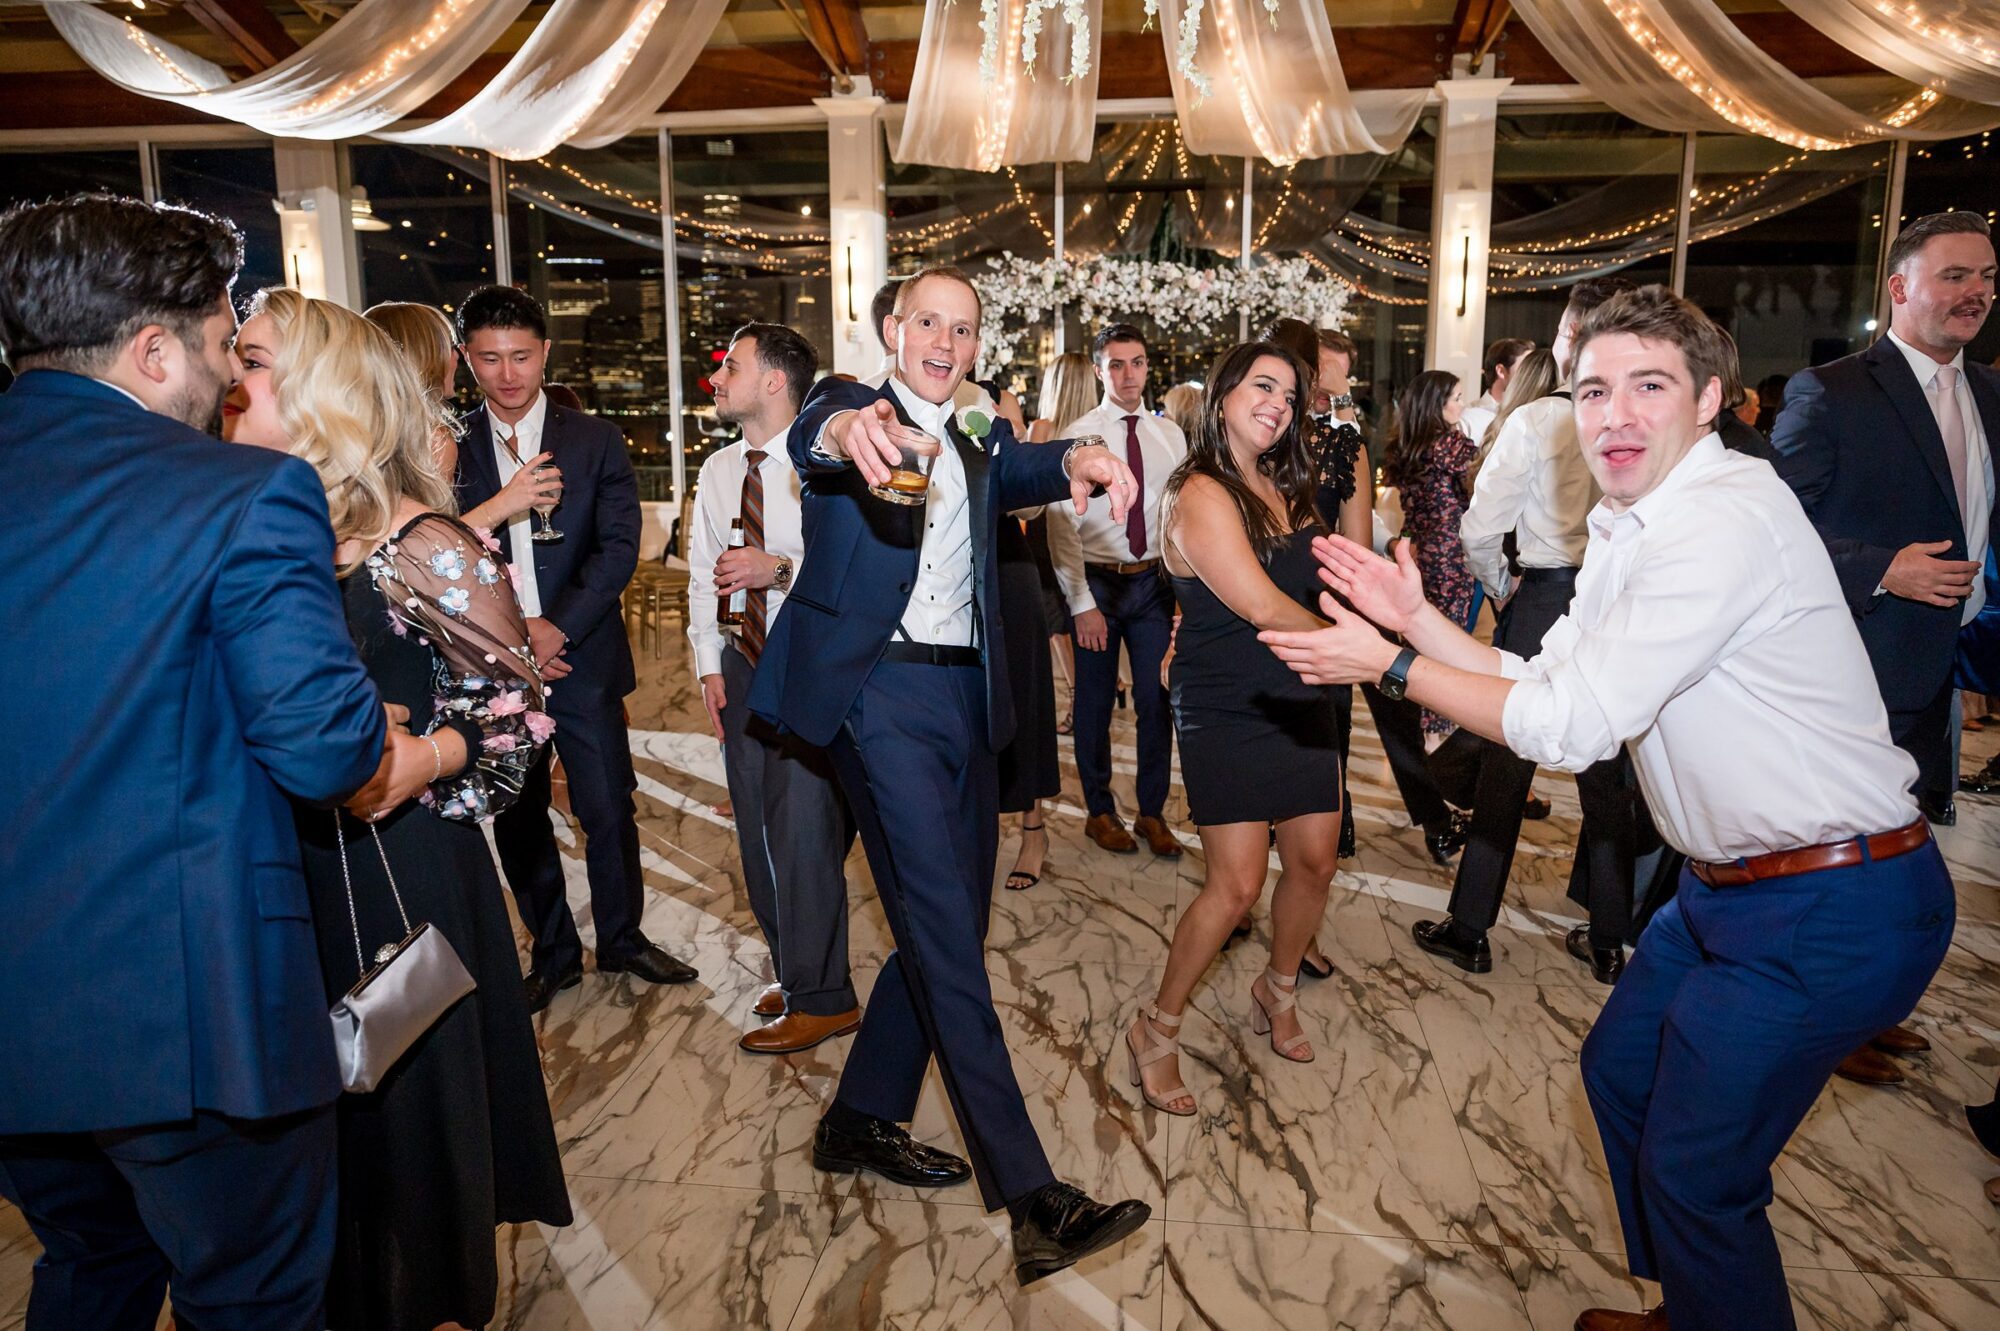 A group of people dancing at a wedding reception.